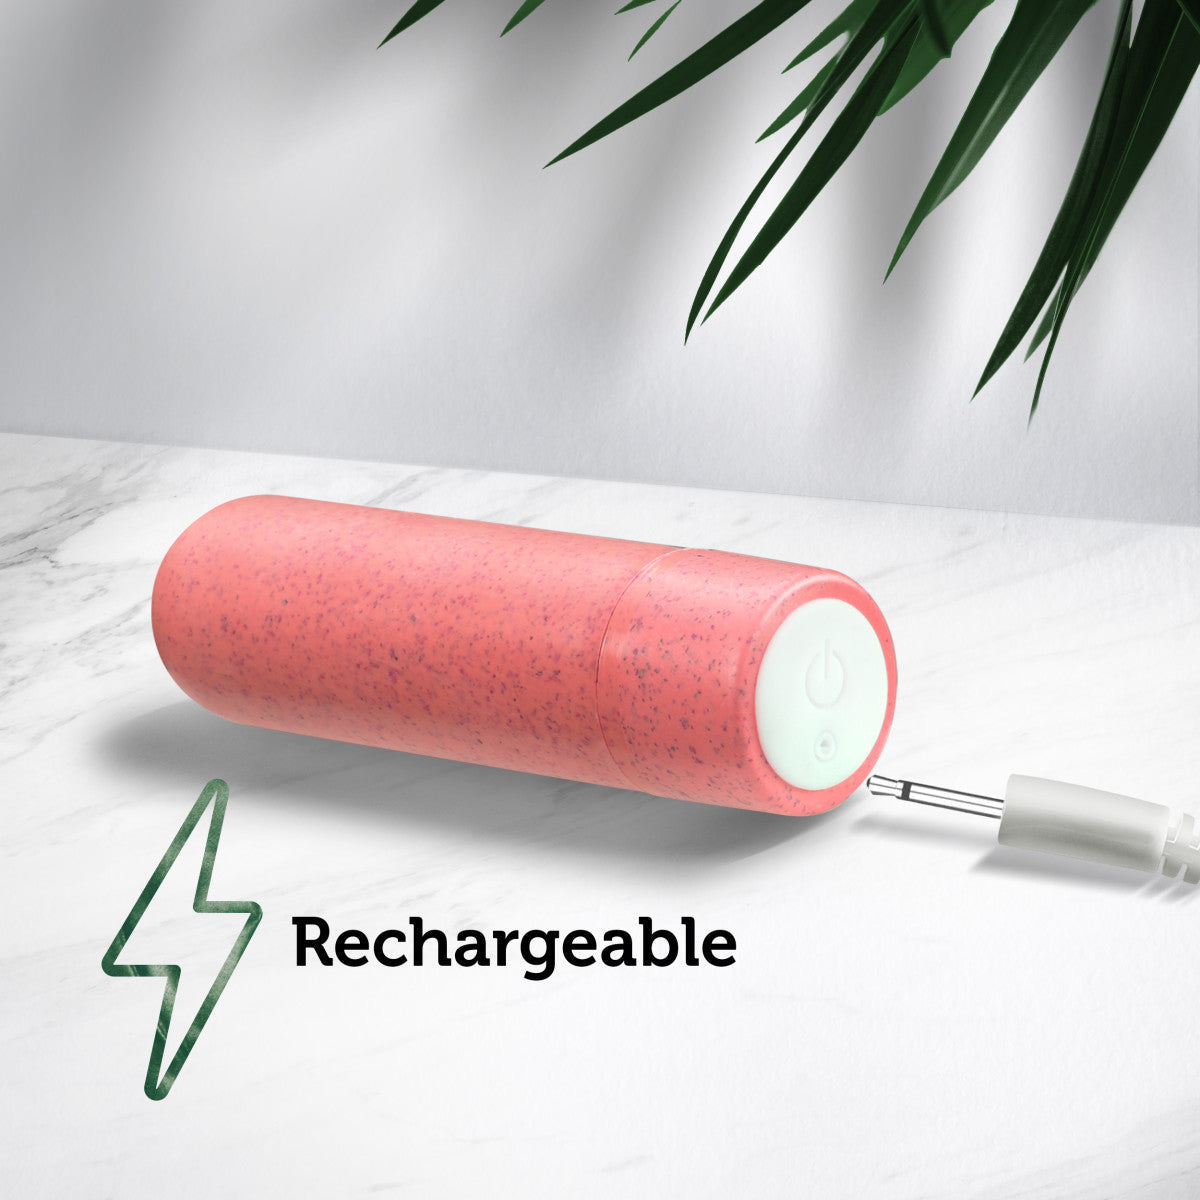 Gaia | Eco Rechargeable: Plant-Based 3" Smooth Multispeed Bullet Vibrator in Coral - 珊瑚色植物基 3 英寸光滑多速子彈頭振動器